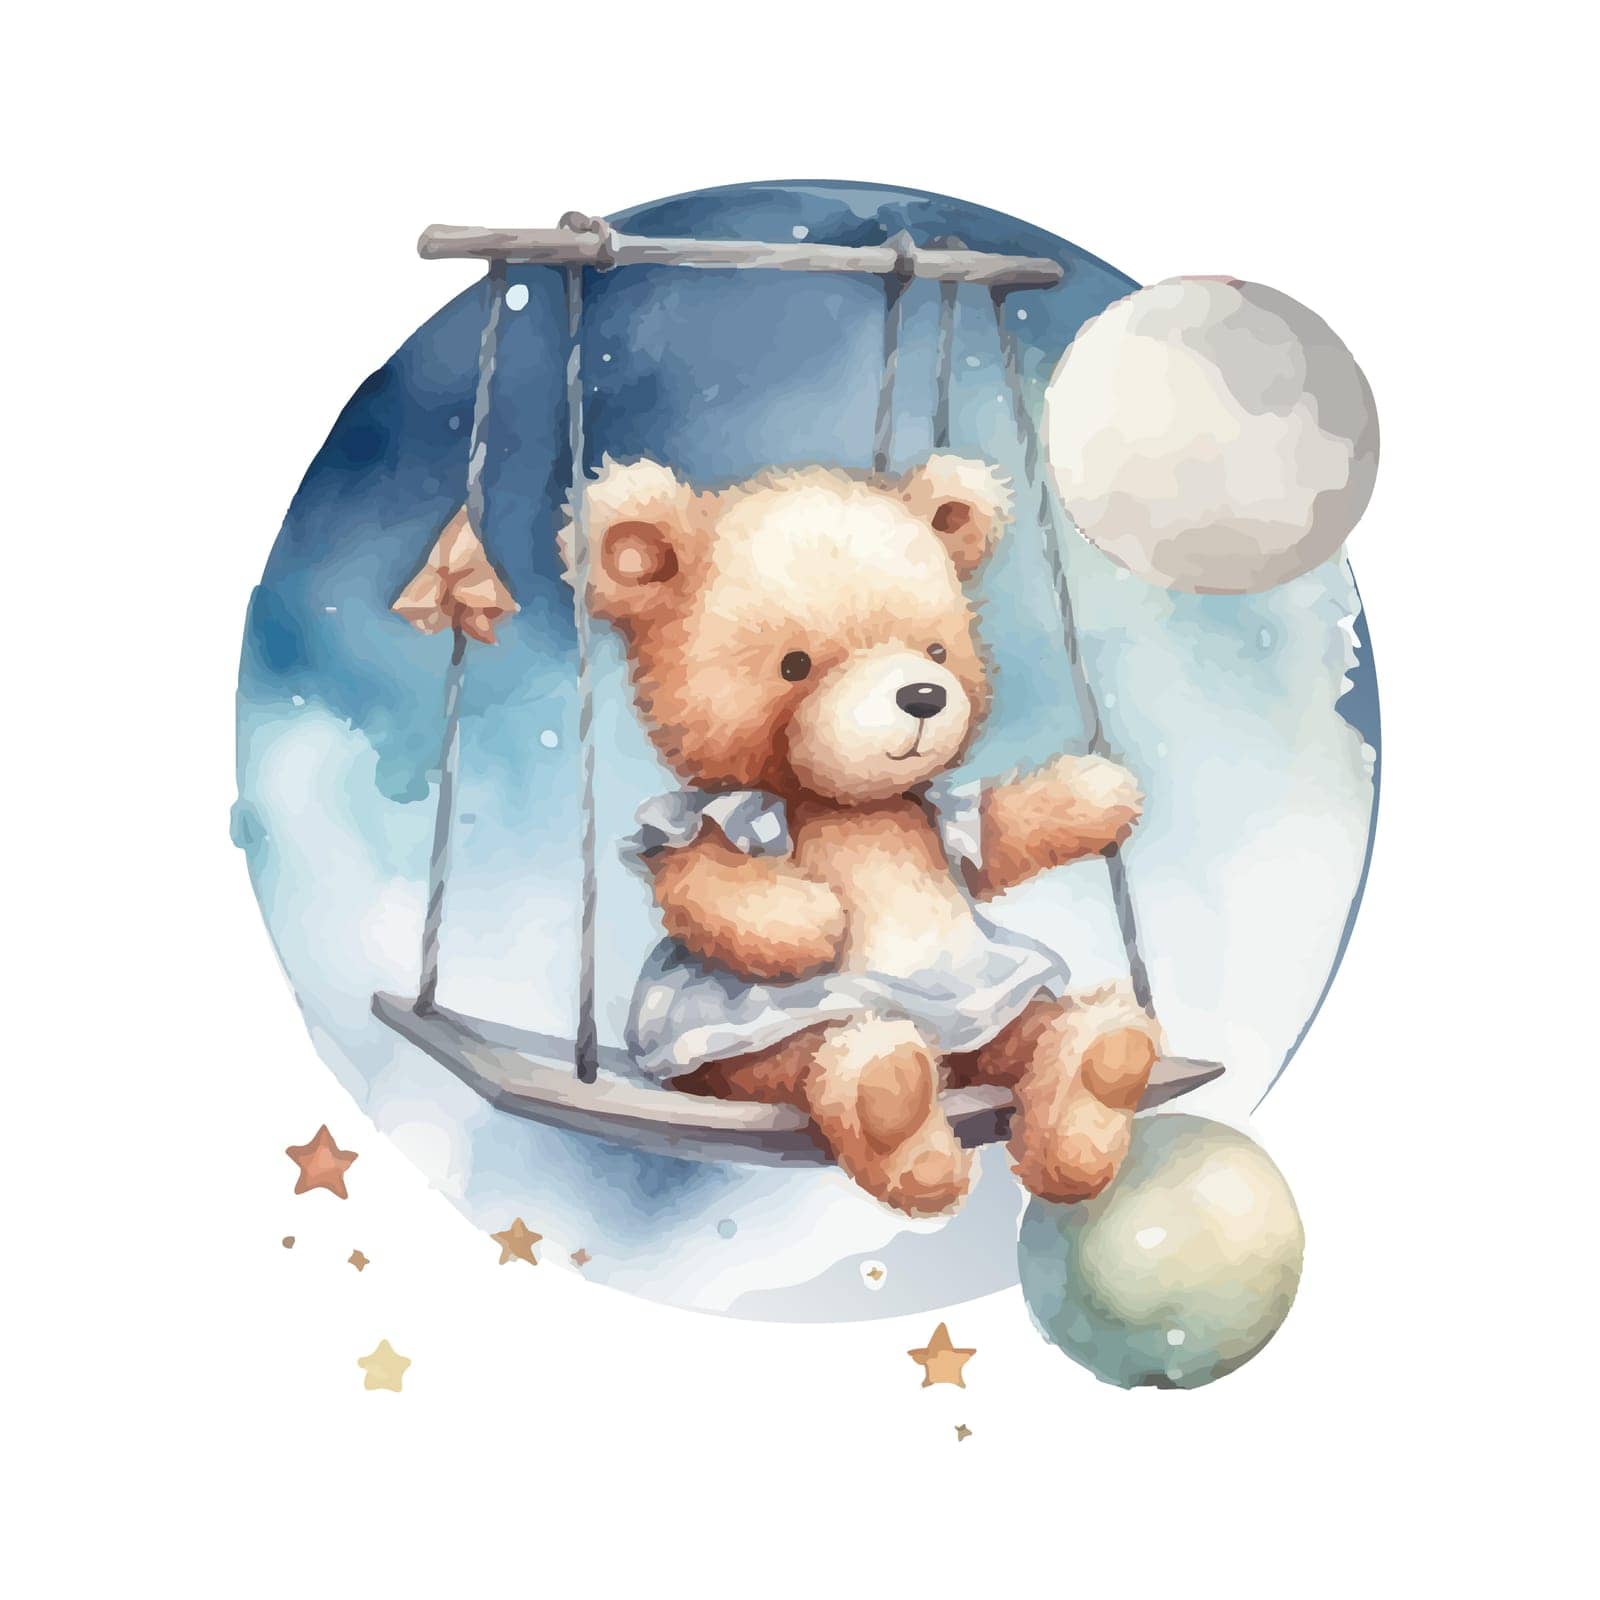 Cute teddy bear swinging on a swing on a star.watercolor hand draw illustration.can be used for kid poster or baby shower by ku4erashka